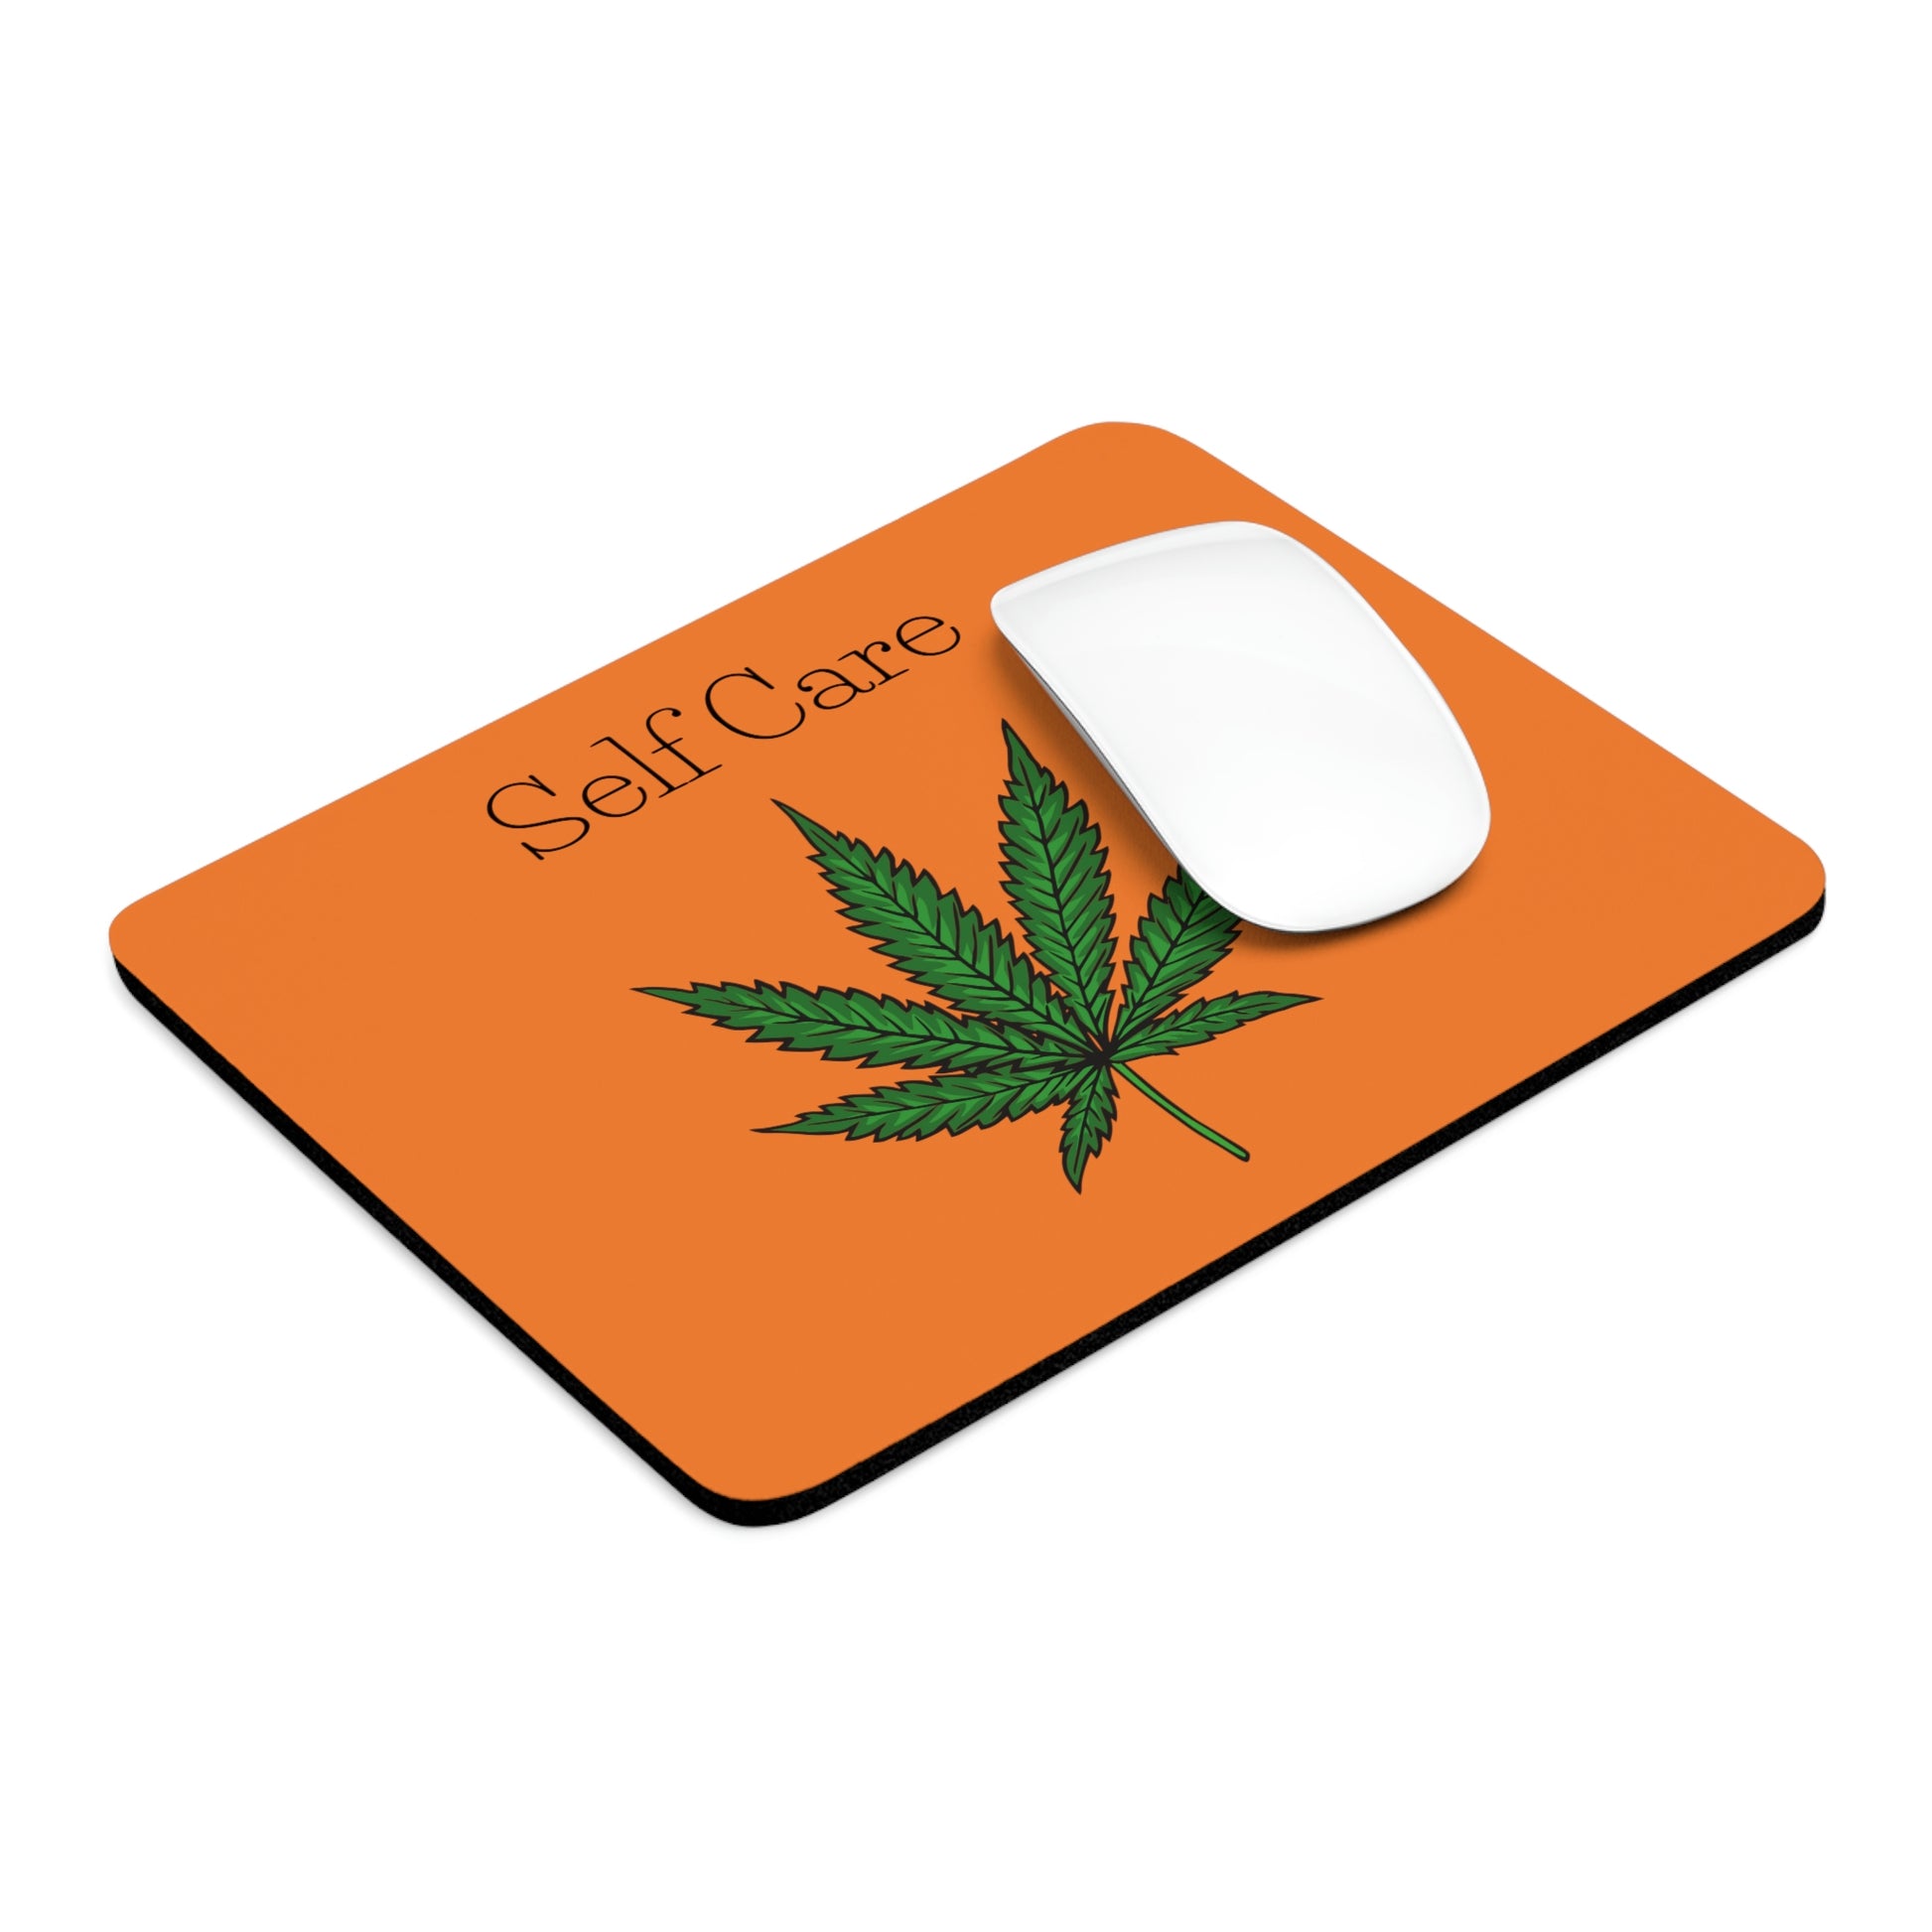 The added white mouse makes the Self Care Cannabis Mouse Pad look so cool on this side angled photo.